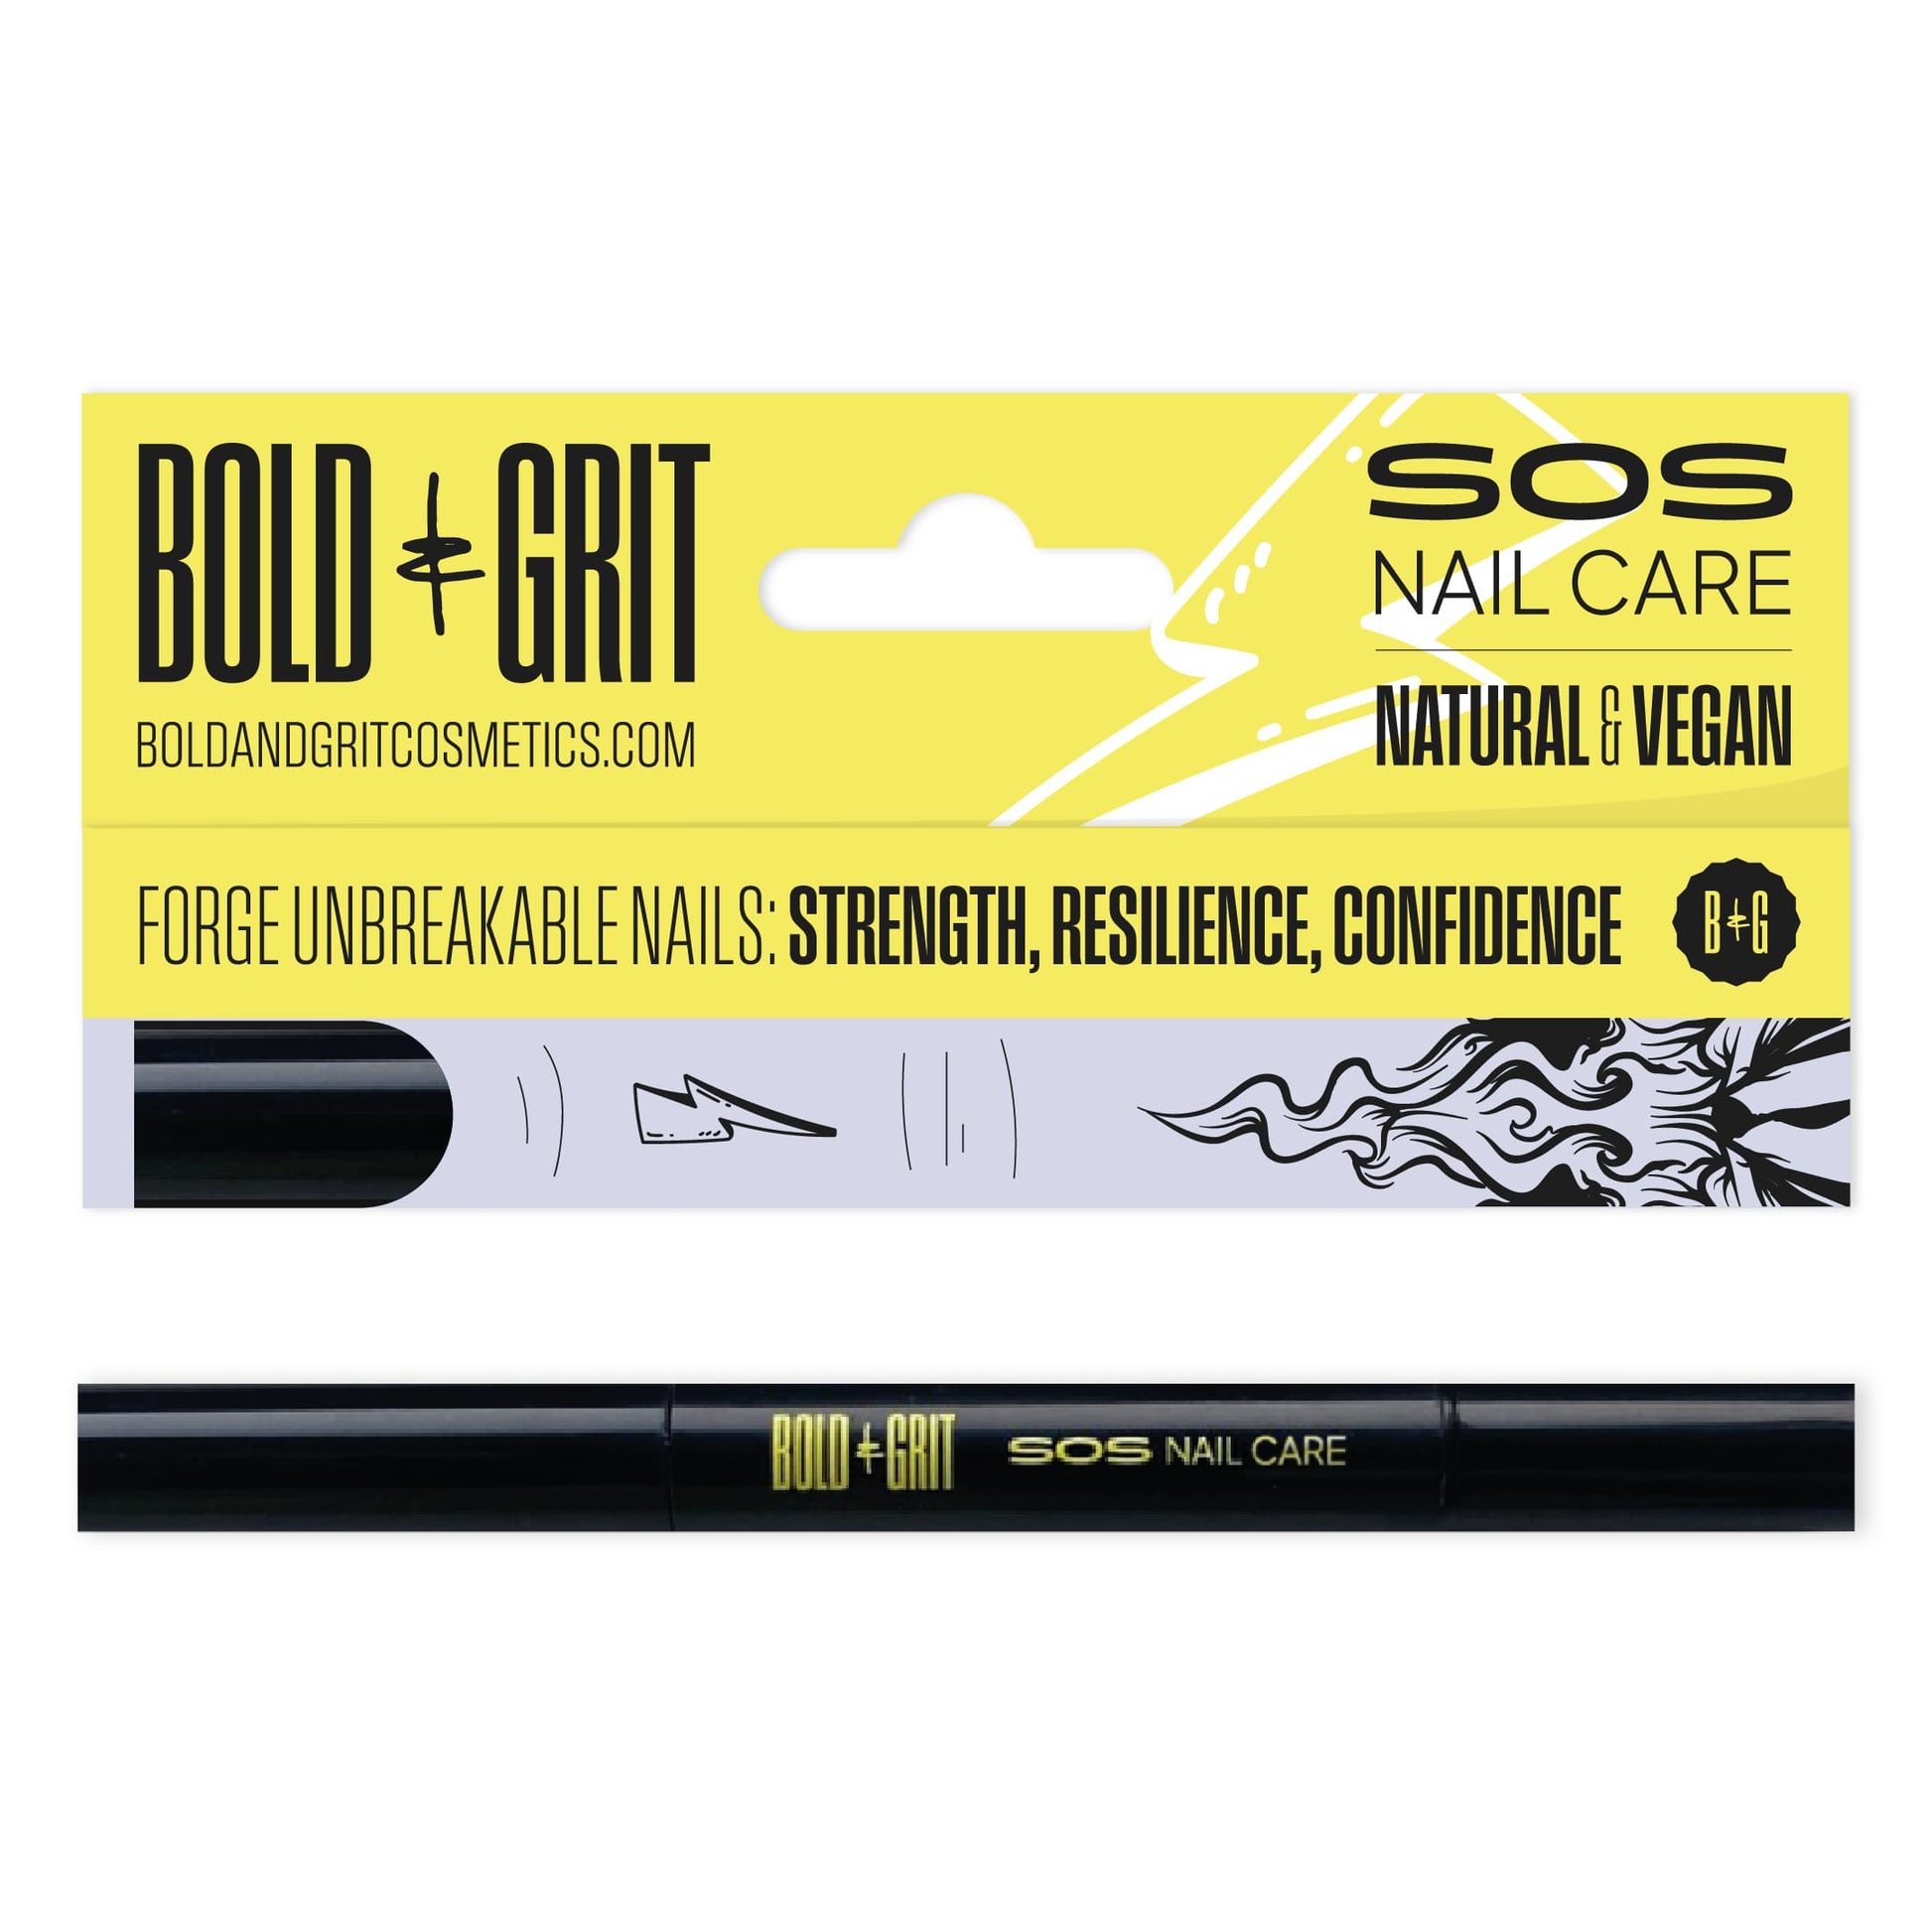 Bold and Grit SOS Nail Care Natural & Vegan showing the nail pen and its packaging from Bold and Grit Cosmetics